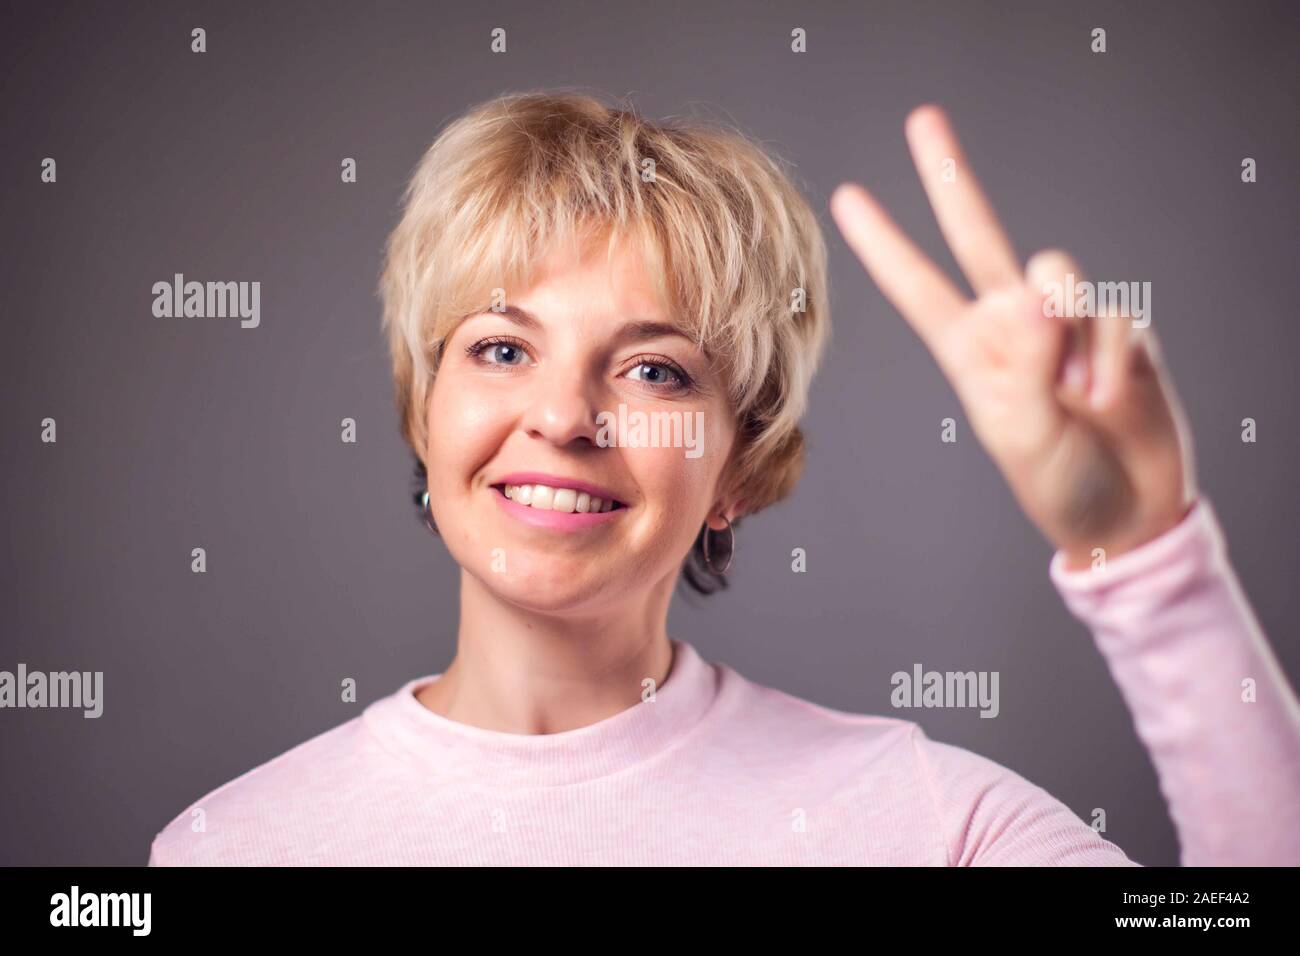 Woman with short blond hair showing okay gesture. People and emotions concept Stock Photo